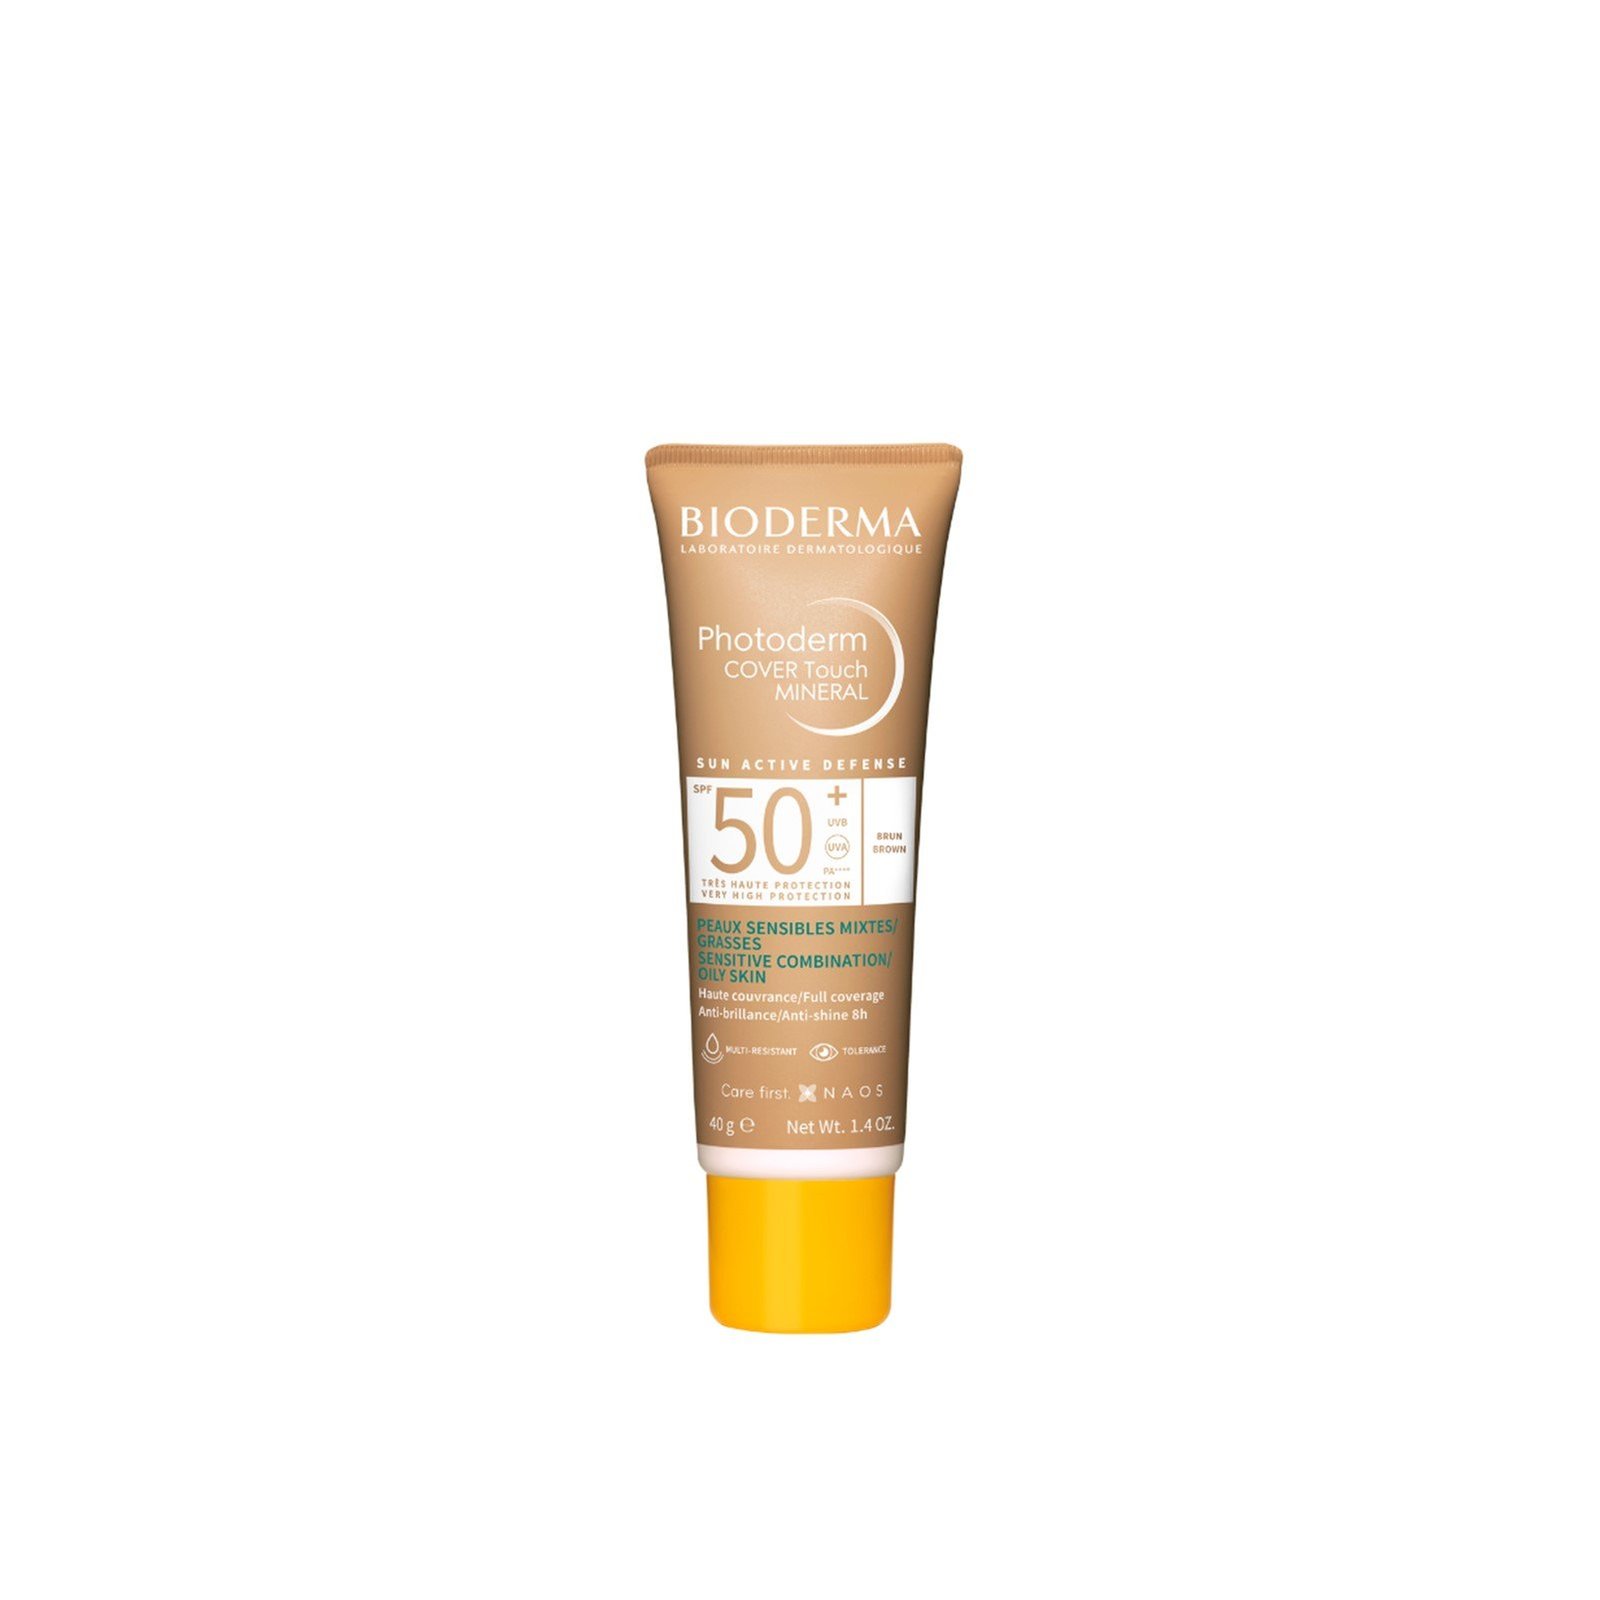 Bioderma Photoderm Cover Touch Mineral SPF50+ Brown 40g